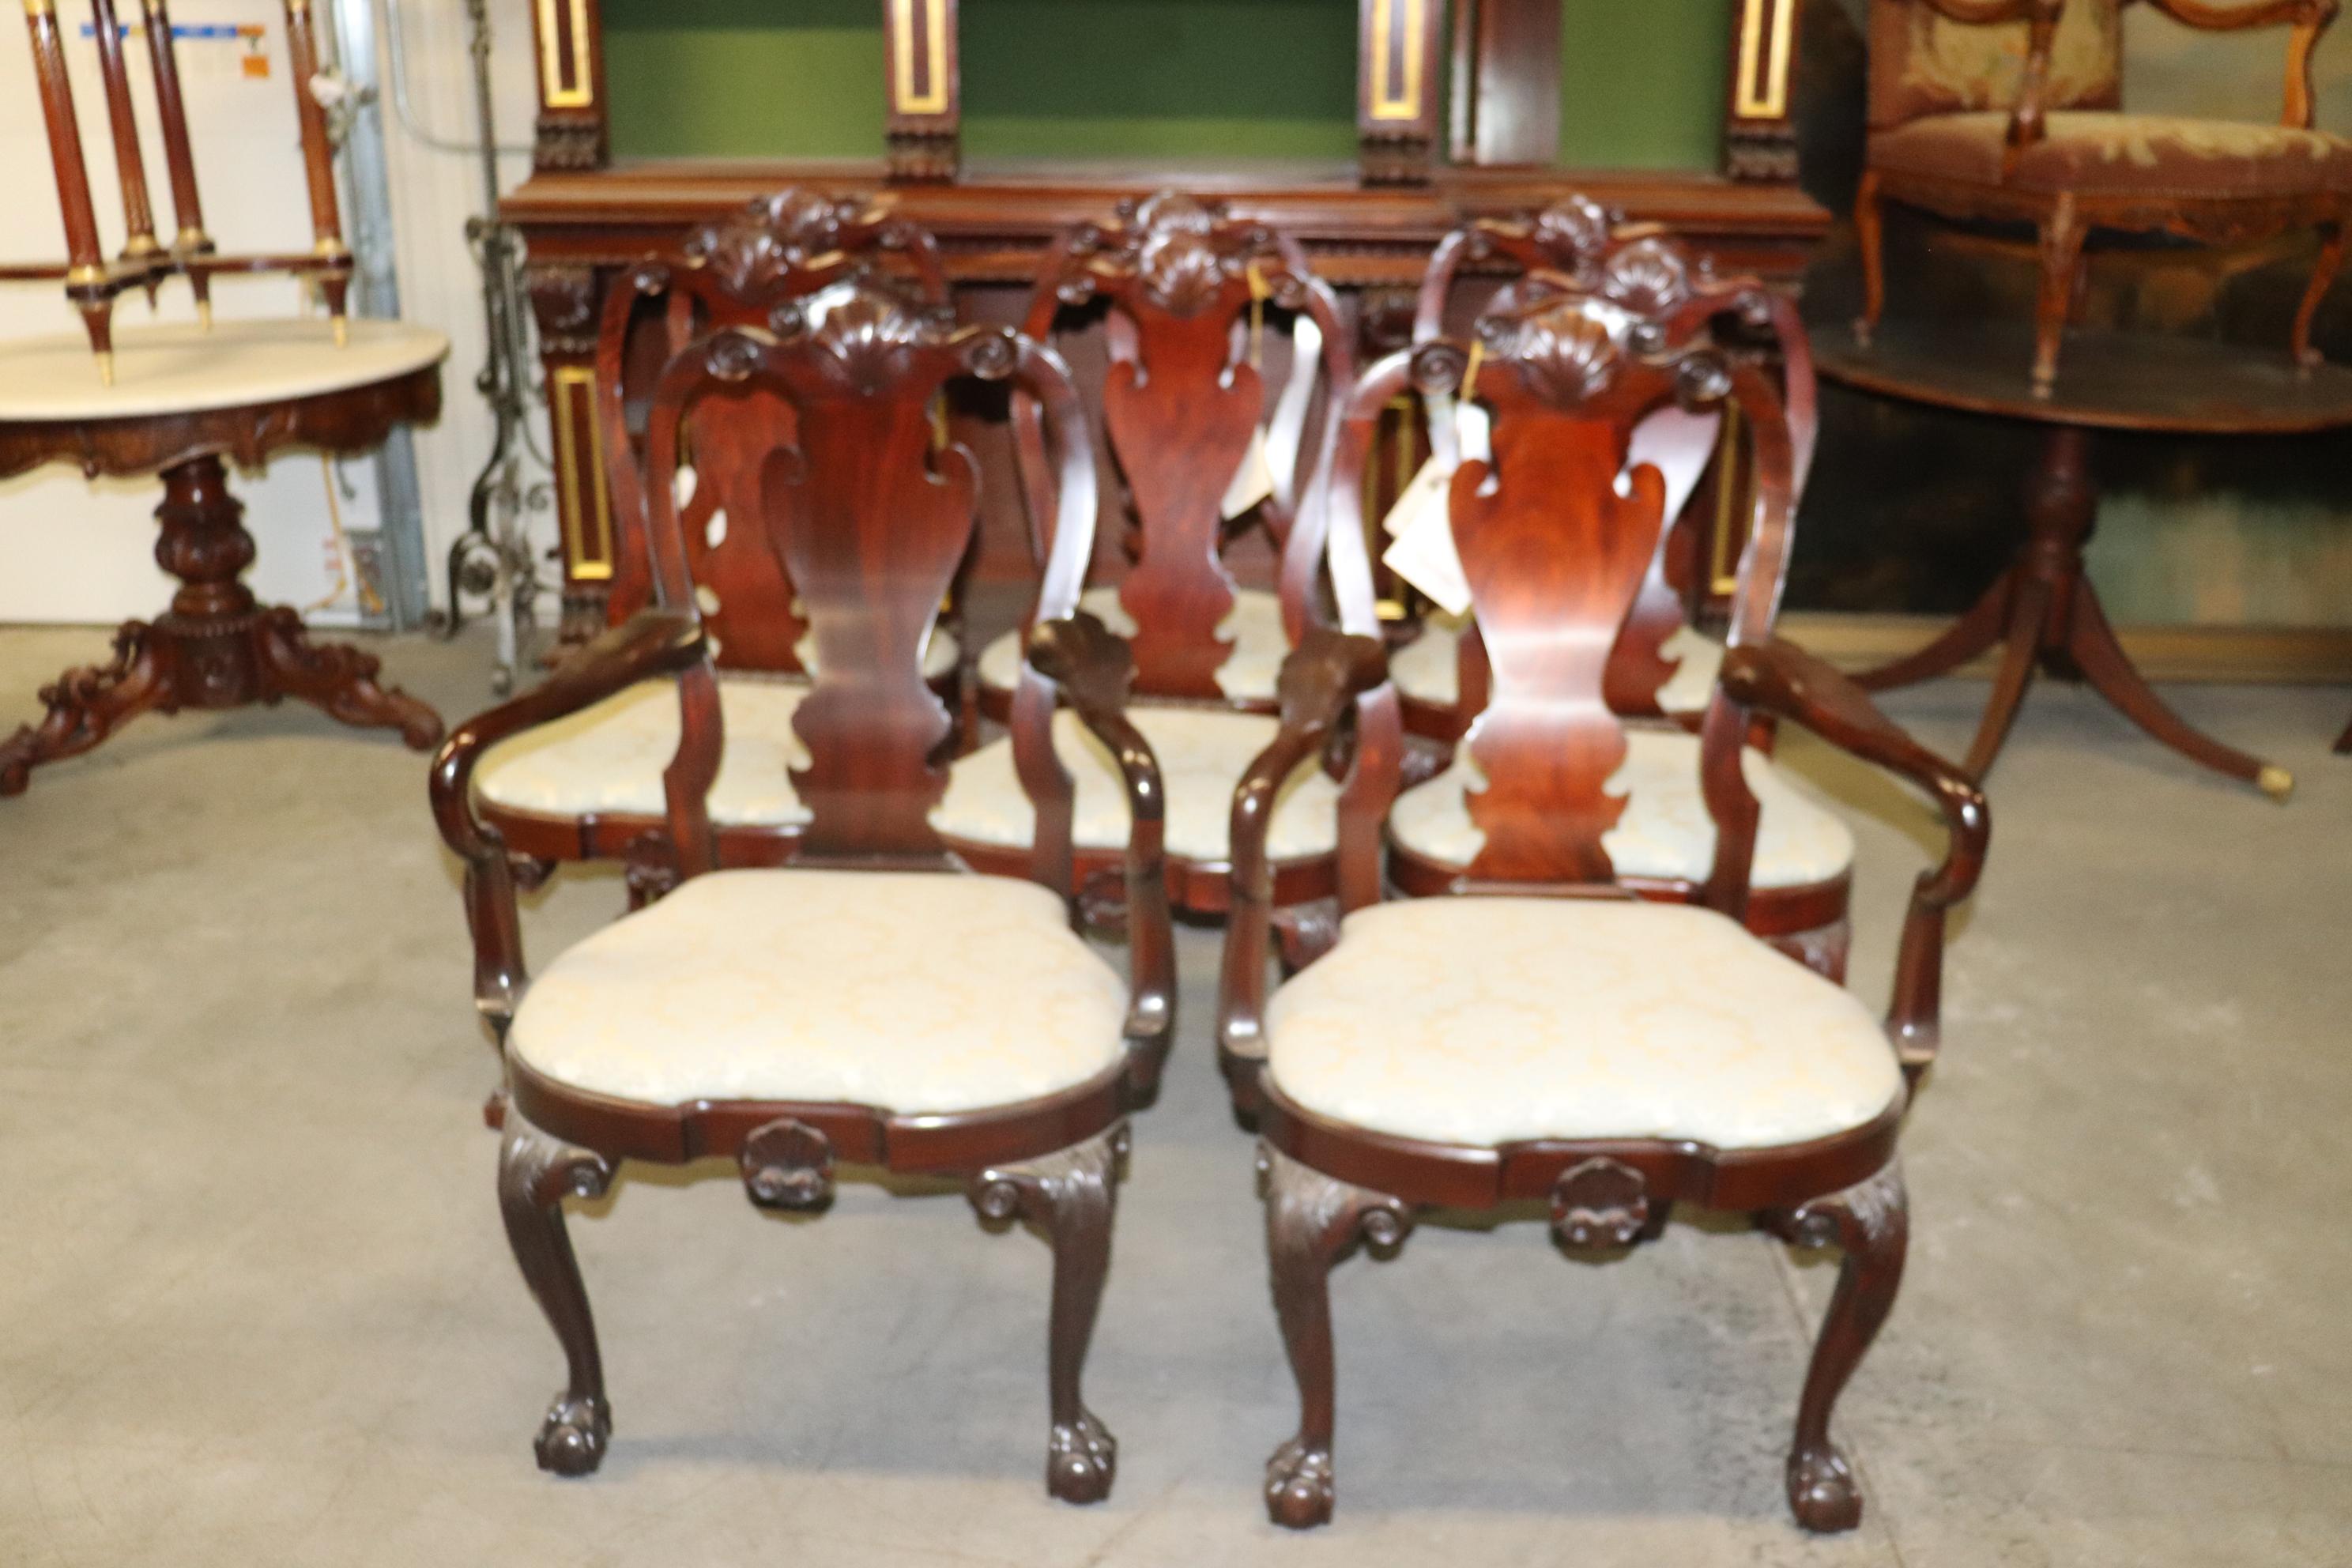 This is a fantastic set of Kindel dining chairs that faithfully reproduce the original chairs found in the Wintherthur nuseum. The chairs feature good upholstery with minimal signs of use and minor stains on one or two chairs that can probably be